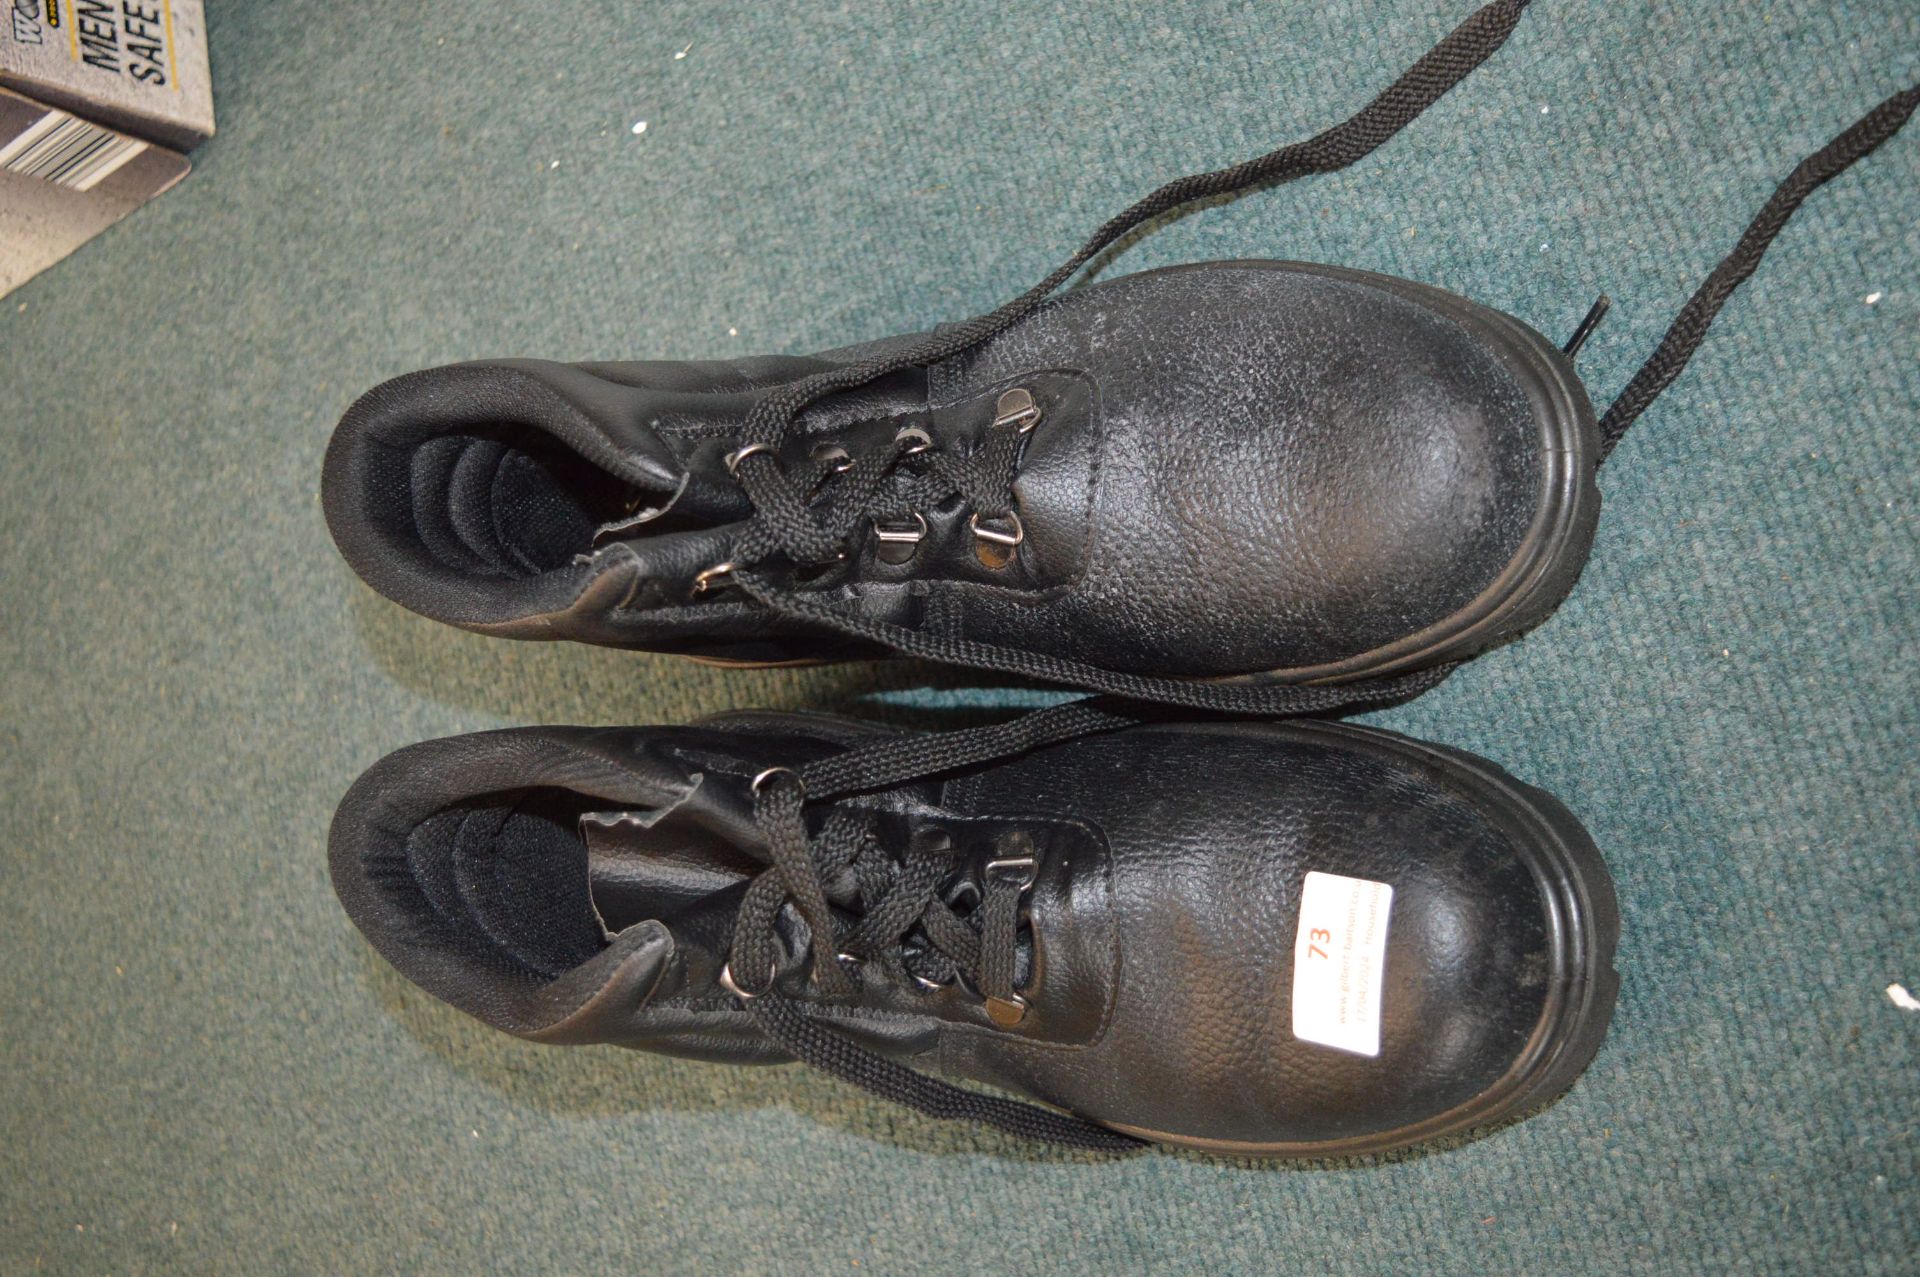 Pair of Biloxxi Safety Boots Size: 8